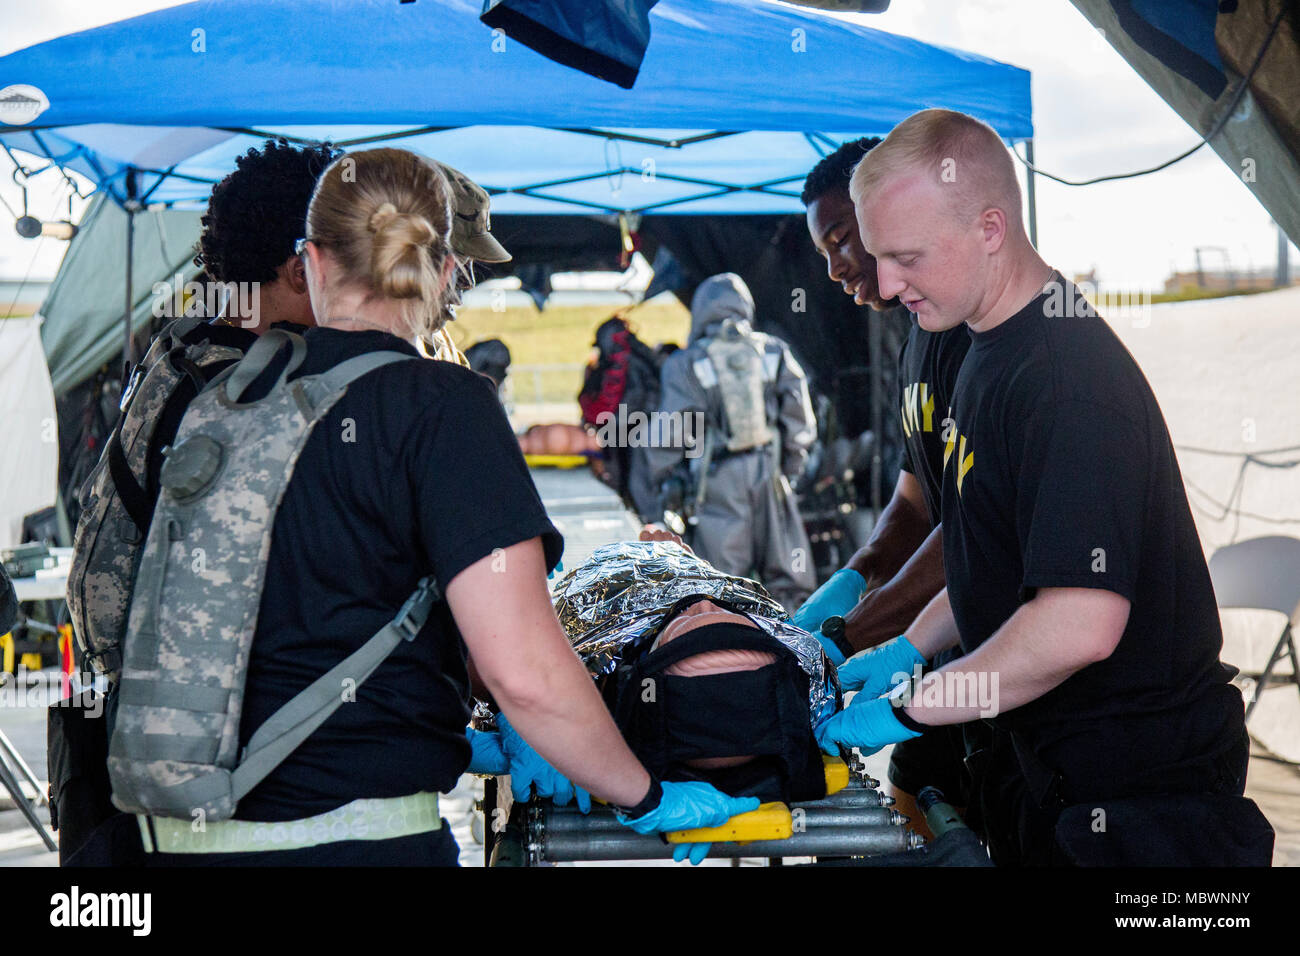 U.S. Army Soldiers of the 414th Chemical Company, exercise a decontamination for a simulated mass chemical attack during a Joint Training Exercise hosted by the Miami-Dade Fire Department and Homestead-Miami Speedway in Miami, Fla. Jan. 11, 2018. This JTE focused on building response capabilities and seamless the transition between the local first responders and the follow-on support provided by the National Guard and Active duty soldiers. (U. S. Army Photo by Spc. P.J. Siquig) Stock Photo